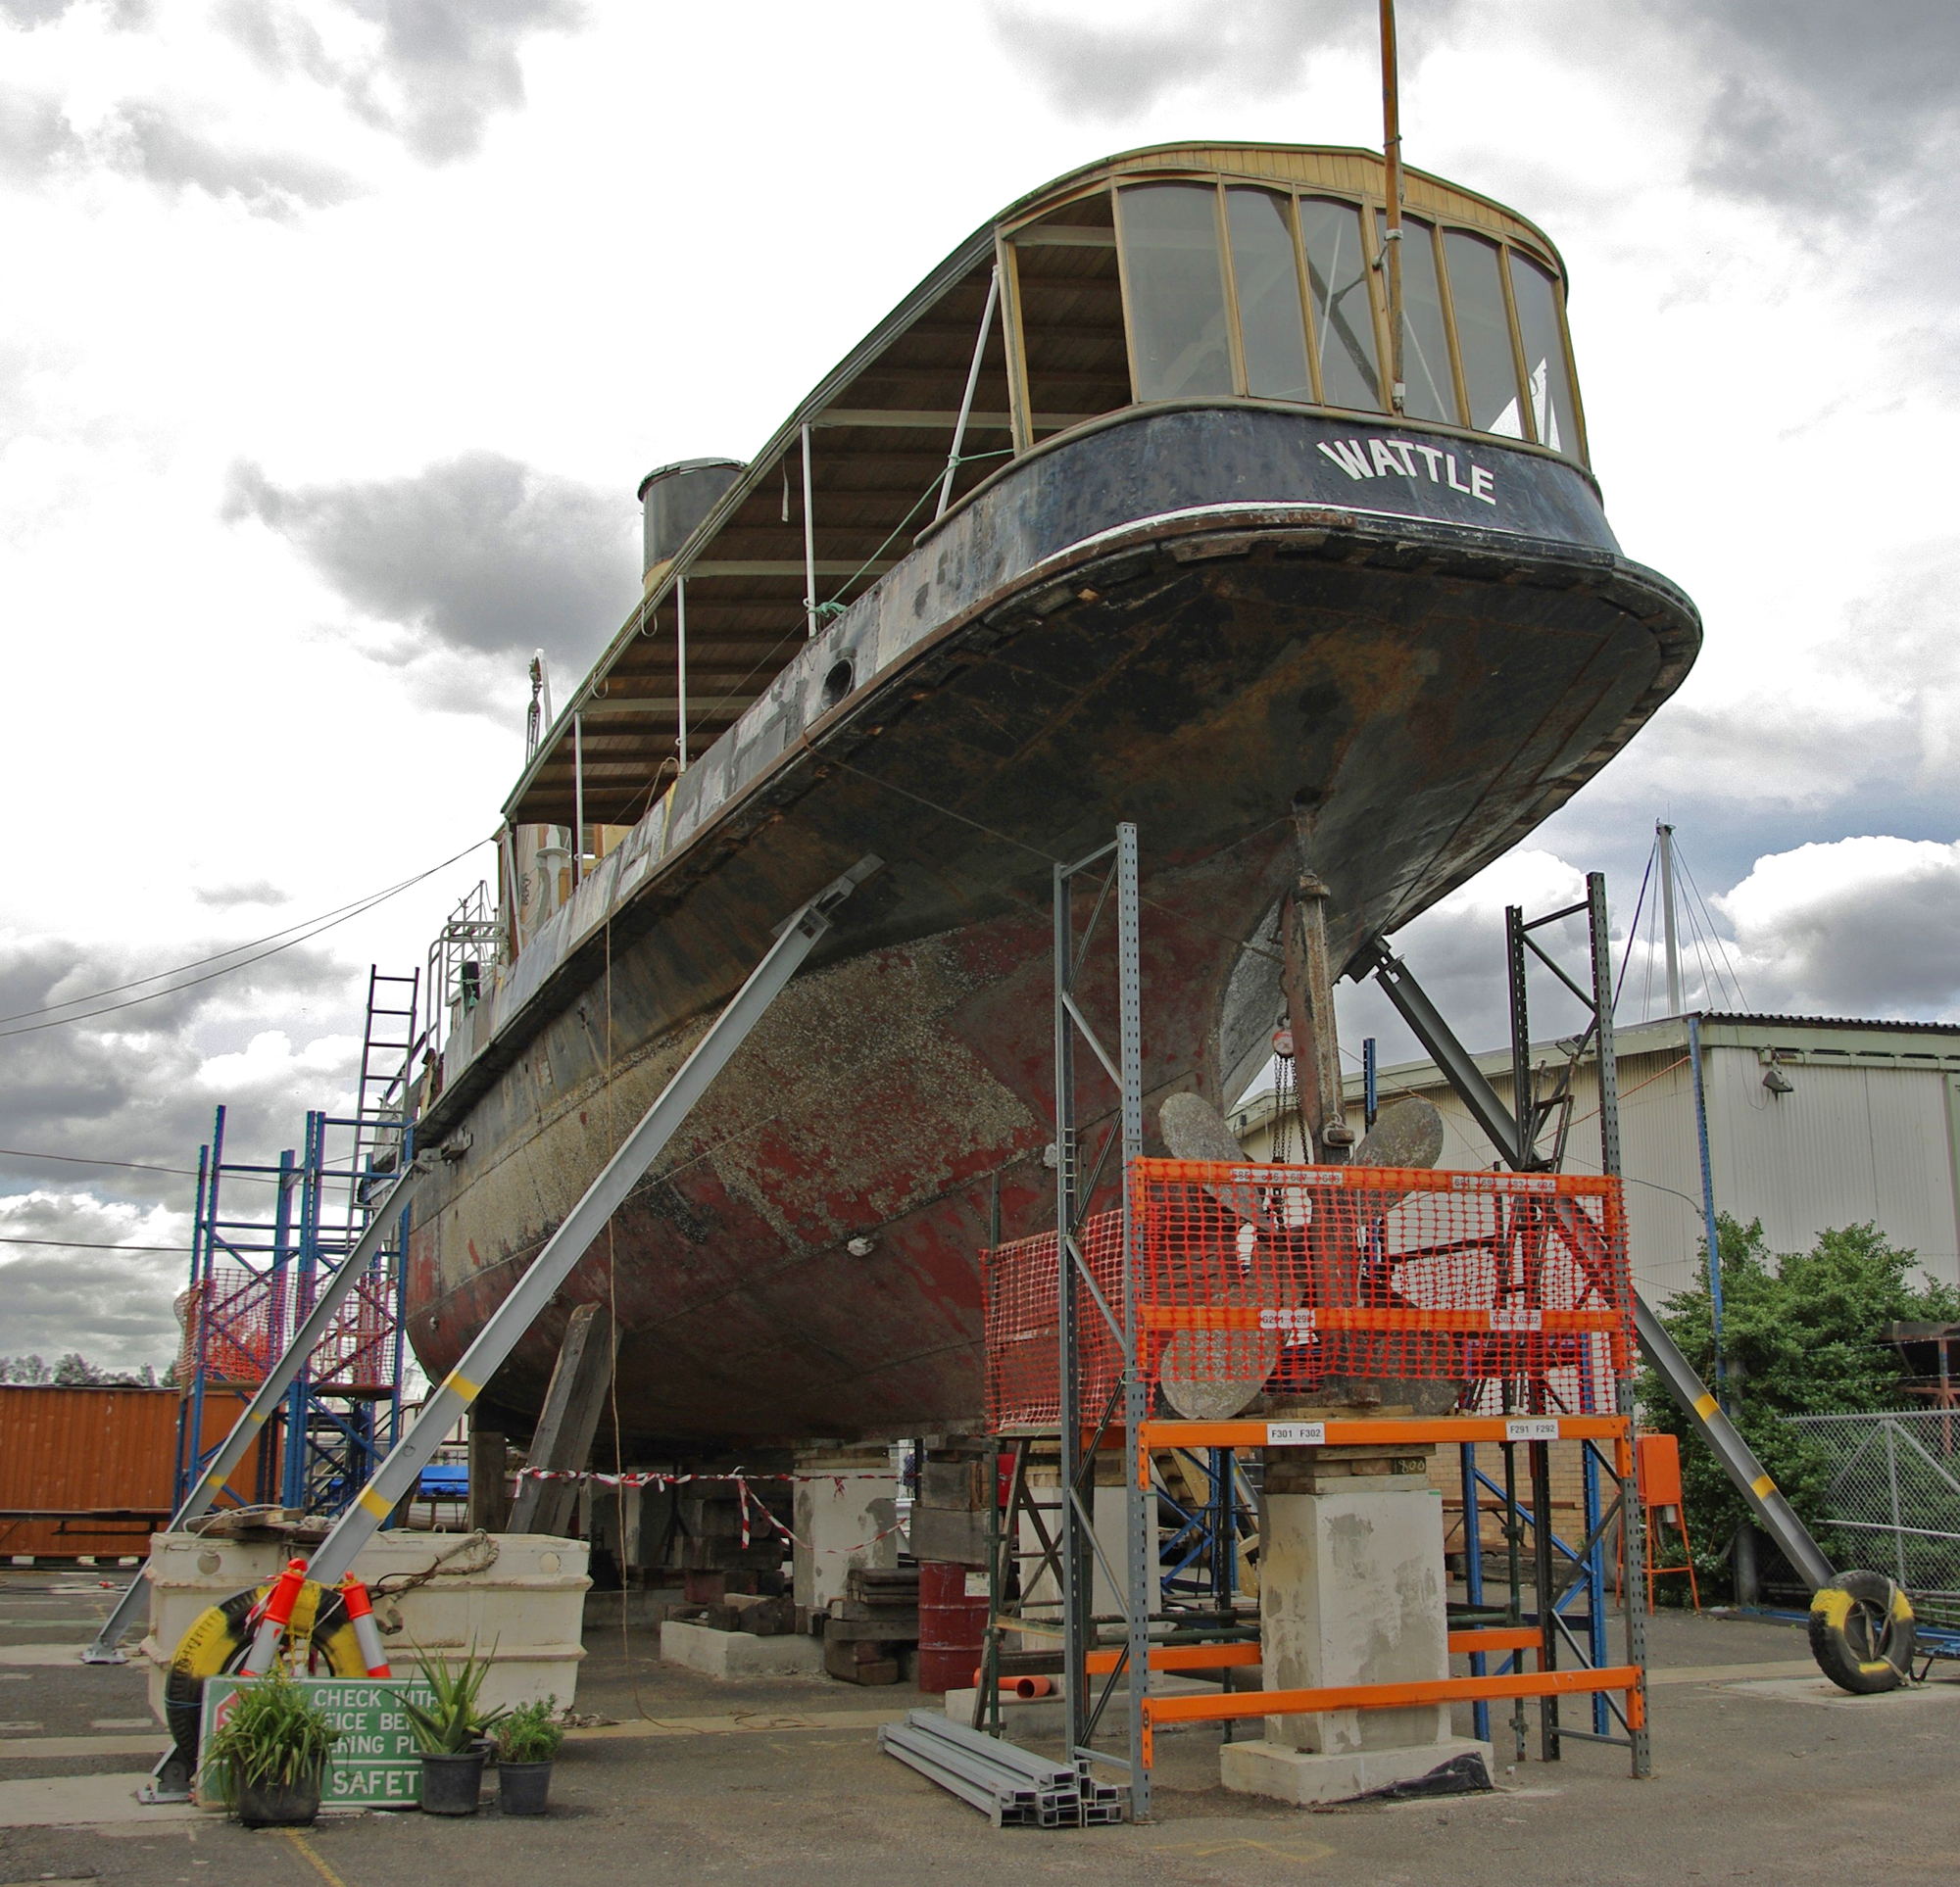 Restoration commenced, South Wharf, December 2010, Jeff Malley